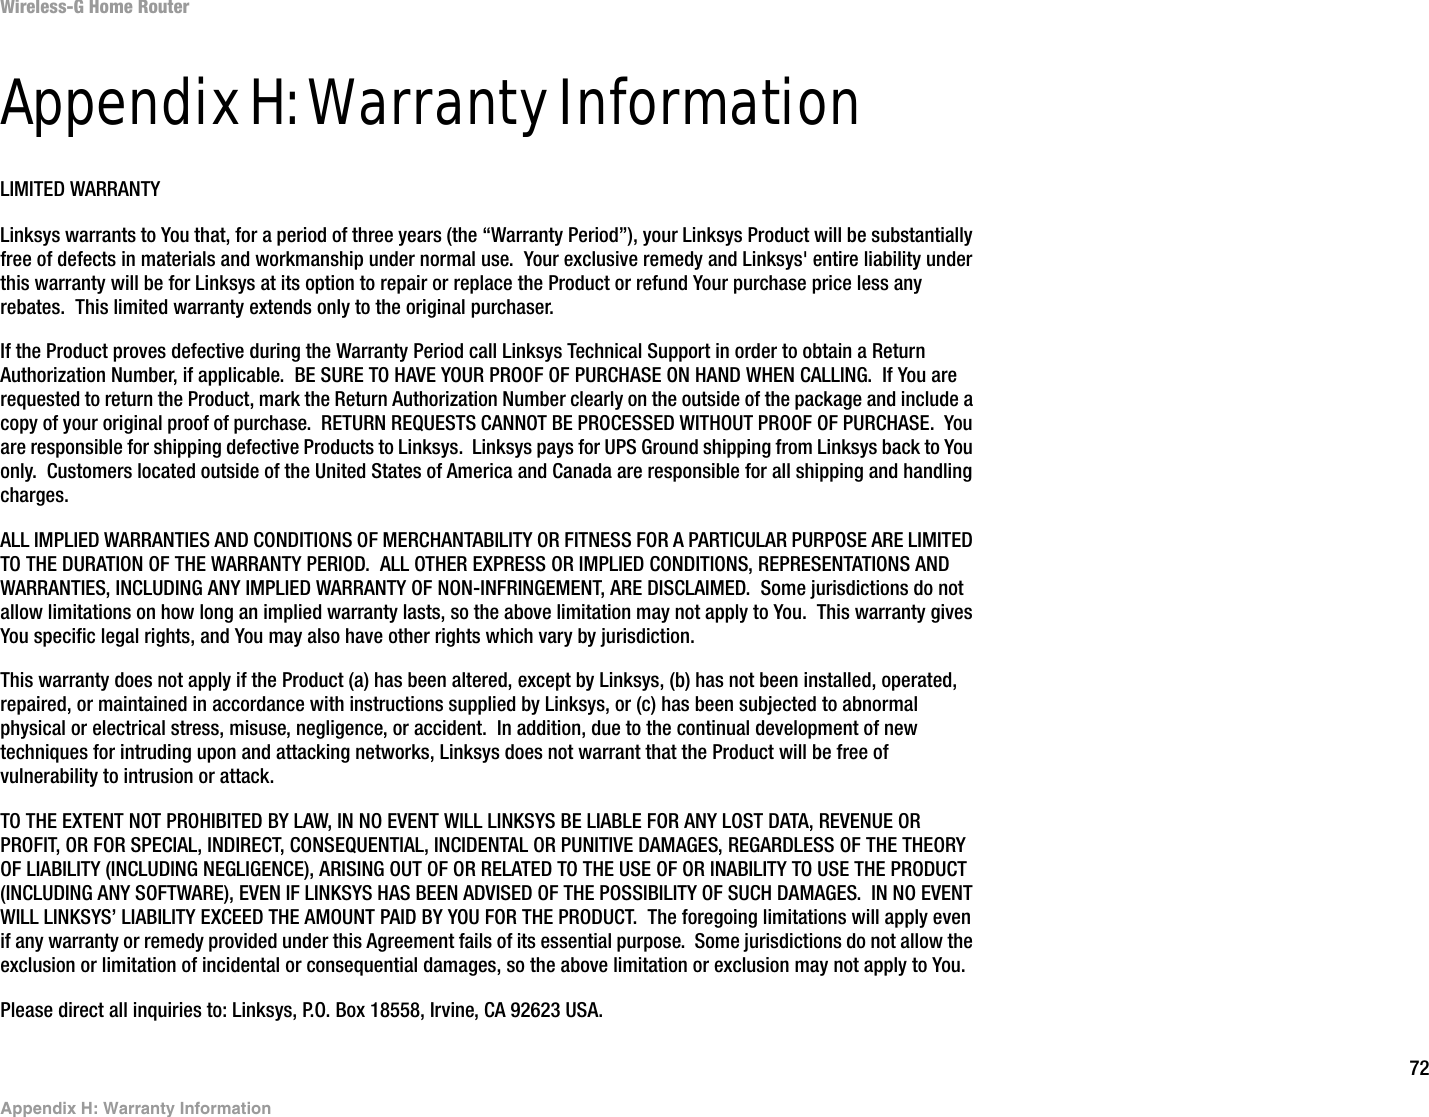 72Appendix H: Warranty InformationWireless-G Home RouterAppendix H: Warranty InformationLIMITED WARRANTYLinksys warrants to You that, for a period of three years (the “Warranty Period”), your Linksys Product will be substantially free of defects in materials and workmanship under normal use.  Your exclusive remedy and Linksys&apos; entire liability under this warranty will be for Linksys at its option to repair or replace the Product or refund Your purchase price less any rebates.  This limited warranty extends only to the original purchaser.  If the Product proves defective during the Warranty Period call Linksys Technical Support in order to obtain a Return Authorization Number, if applicable.  BE SURE TO HAVE YOUR PROOF OF PURCHASE ON HAND WHEN CALLING.  If You are requested to return the Product, mark the Return Authorization Number clearly on the outside of the package and include a copy of your original proof of purchase.  RETURN REQUESTS CANNOT BE PROCESSED WITHOUT PROOF OF PURCHASE.  You are responsible for shipping defective Products to Linksys.  Linksys pays for UPS Ground shipping from Linksys back to You only.  Customers located outside of the United States of America and Canada are responsible for all shipping and handling charges. ALL IMPLIED WARRANTIES AND CONDITIONS OF MERCHANTABILITY OR FITNESS FOR A PARTICULAR PURPOSE ARE LIMITED TO THE DURATION OF THE WARRANTY PERIOD.  ALL OTHER EXPRESS OR IMPLIED CONDITIONS, REPRESENTATIONS AND WARRANTIES, INCLUDING ANY IMPLIED WARRANTY OF NON-INFRINGEMENT, ARE DISCLAIMED.  Some jurisdictions do not allow limitations on how long an implied warranty lasts, so the above limitation may not apply to You.  This warranty gives You specific legal rights, and You may also have other rights which vary by jurisdiction.This warranty does not apply if the Product (a) has been altered, except by Linksys, (b) has not been installed, operated, repaired, or maintained in accordance with instructions supplied by Linksys, or (c) has been subjected to abnormal physical or electrical stress, misuse, negligence, or accident.  In addition, due to the continual development of new techniques for intruding upon and attacking networks, Linksys does not warrant that the Product will be free of vulnerability to intrusion or attack.TO THE EXTENT NOT PROHIBITED BY LAW, IN NO EVENT WILL LINKSYS BE LIABLE FOR ANY LOST DATA, REVENUE OR PROFIT, OR FOR SPECIAL, INDIRECT, CONSEQUENTIAL, INCIDENTAL OR PUNITIVE DAMAGES, REGARDLESS OF THE THEORY OF LIABILITY (INCLUDING NEGLIGENCE), ARISING OUT OF OR RELATED TO THE USE OF OR INABILITY TO USE THE PRODUCT (INCLUDING ANY SOFTWARE), EVEN IF LINKSYS HAS BEEN ADVISED OF THE POSSIBILITY OF SUCH DAMAGES.  IN NO EVENT WILL LINKSYS’ LIABILITY EXCEED THE AMOUNT PAID BY YOU FOR THE PRODUCT.  The foregoing limitations will apply even if any warranty or remedy provided under this Agreement fails of its essential purpose.  Some jurisdictions do not allow the exclusion or limitation of incidental or consequential damages, so the above limitation or exclusion may not apply to You.Please direct all inquiries to: Linksys, P.O. Box 18558, Irvine, CA 92623 USA.